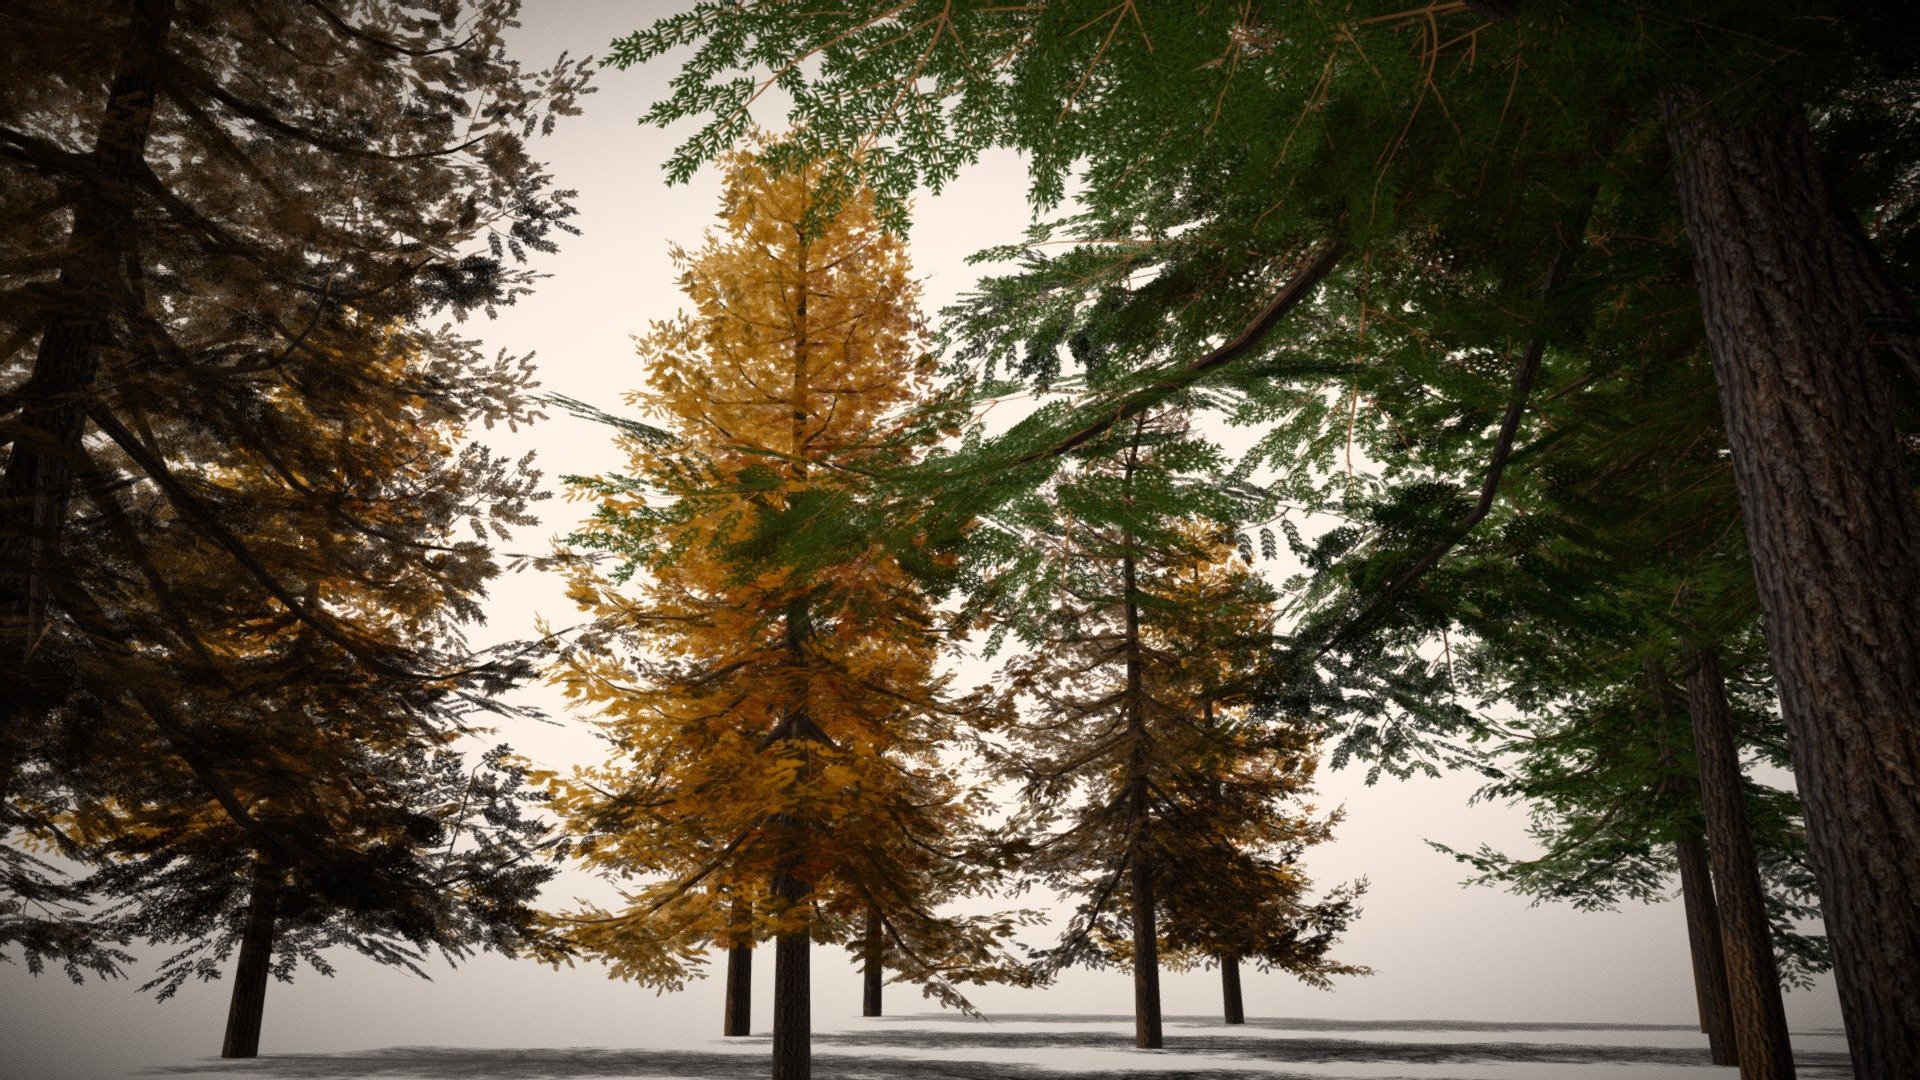 Pine Trees Low-Mid Poly
Full Scene File :Click Here
Note: The above Pine-Tree Showcase file is also included.

Asset Pack Description:-

5 types of Pine Tree mesh with Color Variations
Road and Rails mesh Modular(Use Array with Curve Modifier)
Full Scene fbx included
Textures Included

Additional Files Structure:-

Export Folder contain all the fbx model
Texture folder contain all the Textures
Pine Trees Blend file with SceneFile

Additional Notes/Tips:-

All Trees have Poly Count Less than 12k
Use subsurface/Translucency with lighter shade of leaf Texture using Brightness/Contrast in shader editor.
Roughness map on Leaf not applicable use value 0-1 according to your requirements and use lower secular Value unless you want some shiny Leaves
Use Color variation with same Normal And Opacity Mask in Shader Editor.

Thank You!
Contact me :nk.vmc.s@gmail.com - Pine Trees Low-Mid Poly - Buy Royalty Free 3D model by Nicholas-3D (@Nicholas01) 3d model